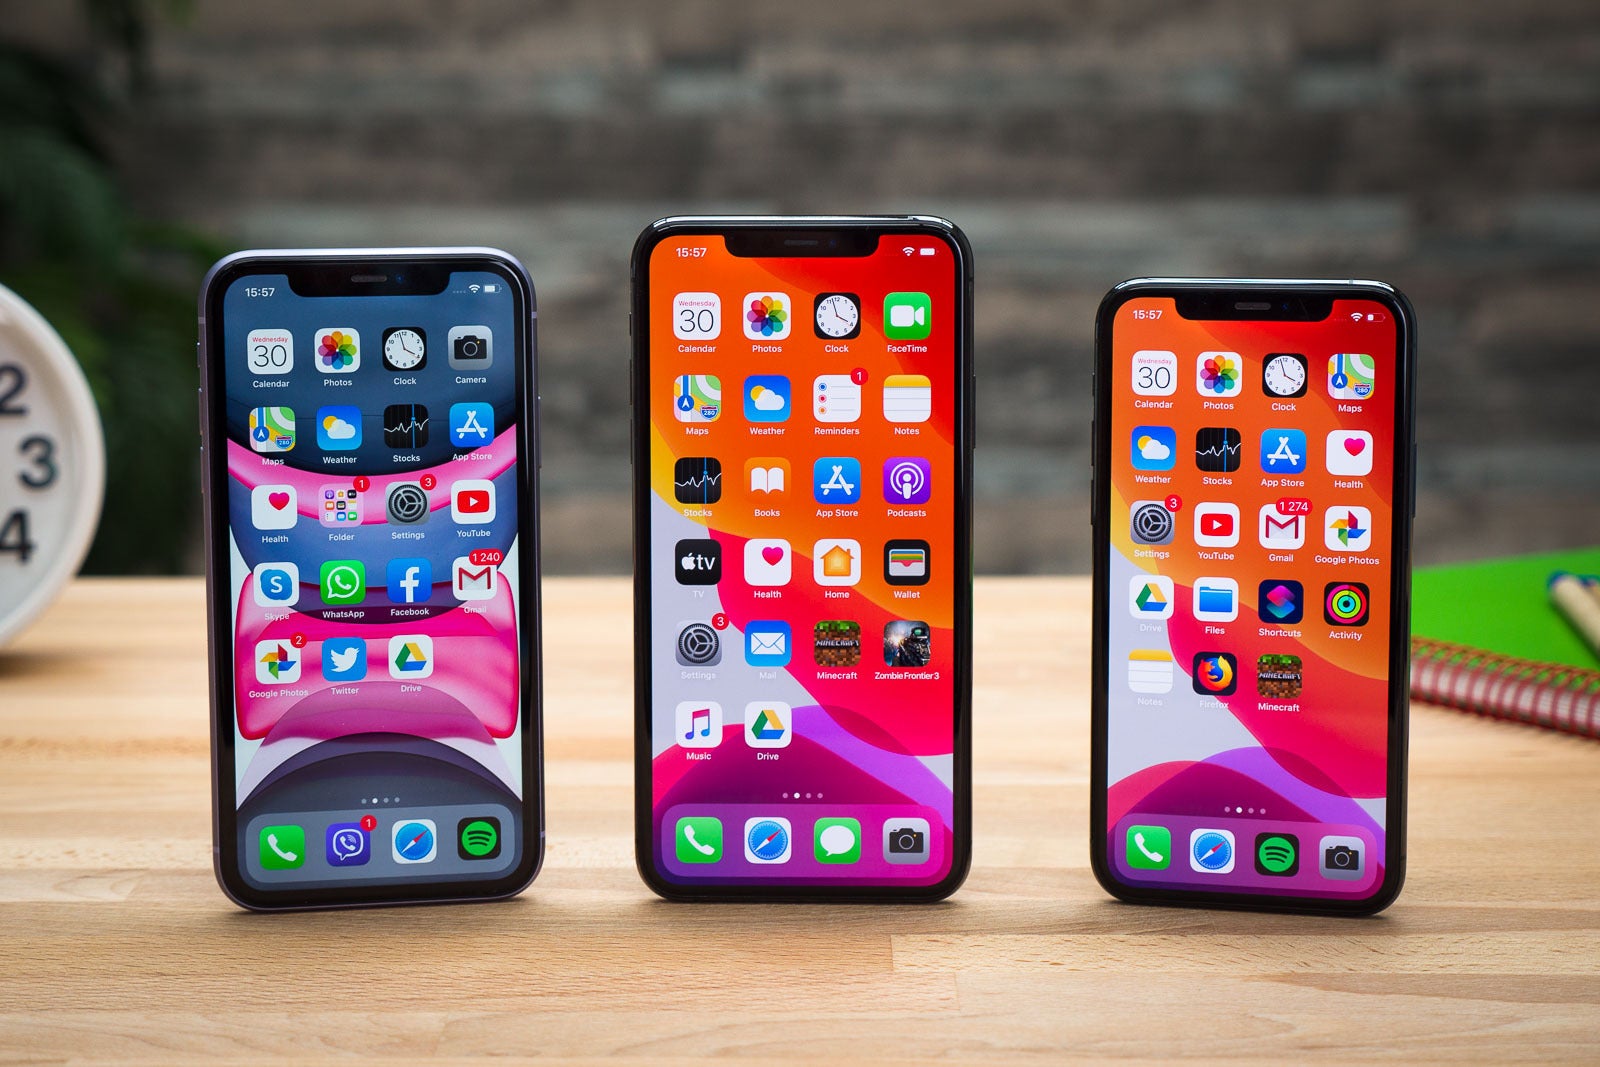  The iPhone 11, iPhone 11 Pro, and iPhone 11 Pro Max - The iPhone 11/Pro made up almost 70% of US iPhone sales last quarter